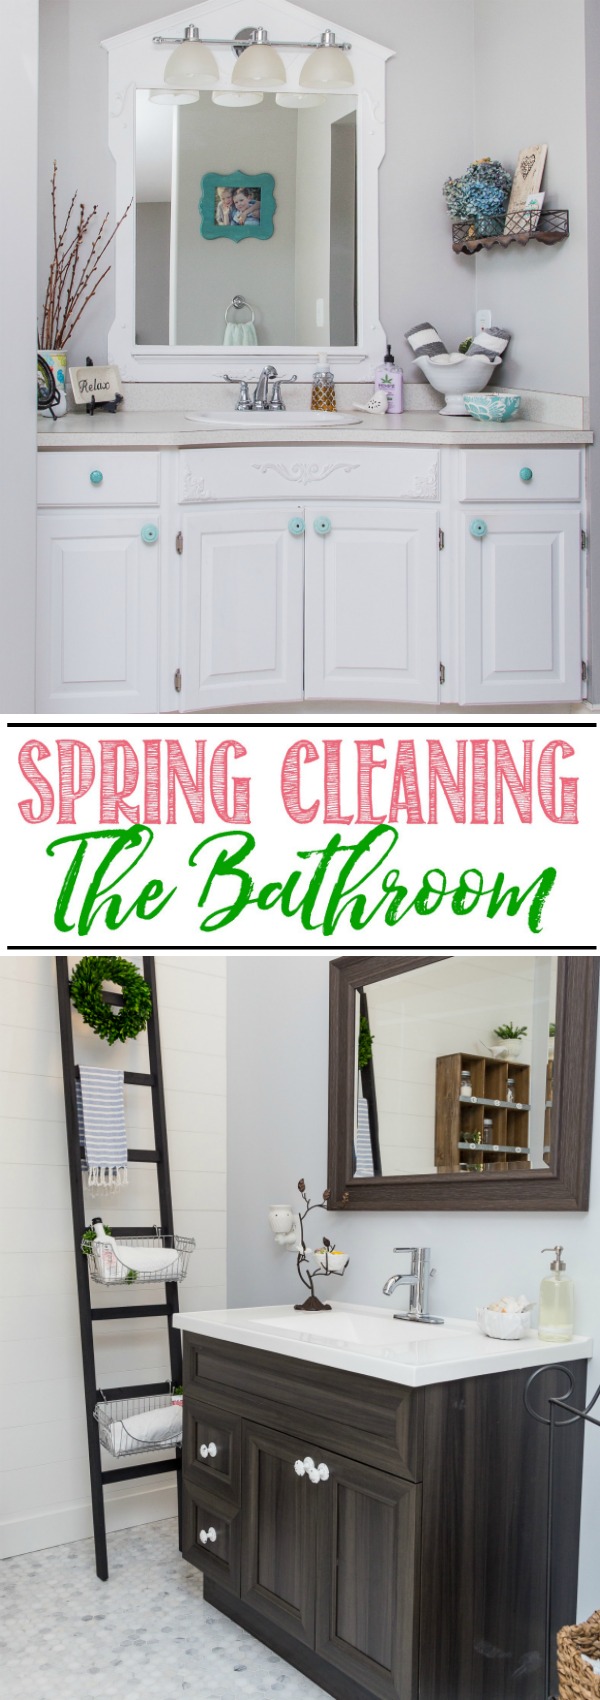 Bathroom Spring Cleaning Guide - Everything you need to get your bathroom cleaned from top to bottom! Free printable bathroom cleaning checklist included.